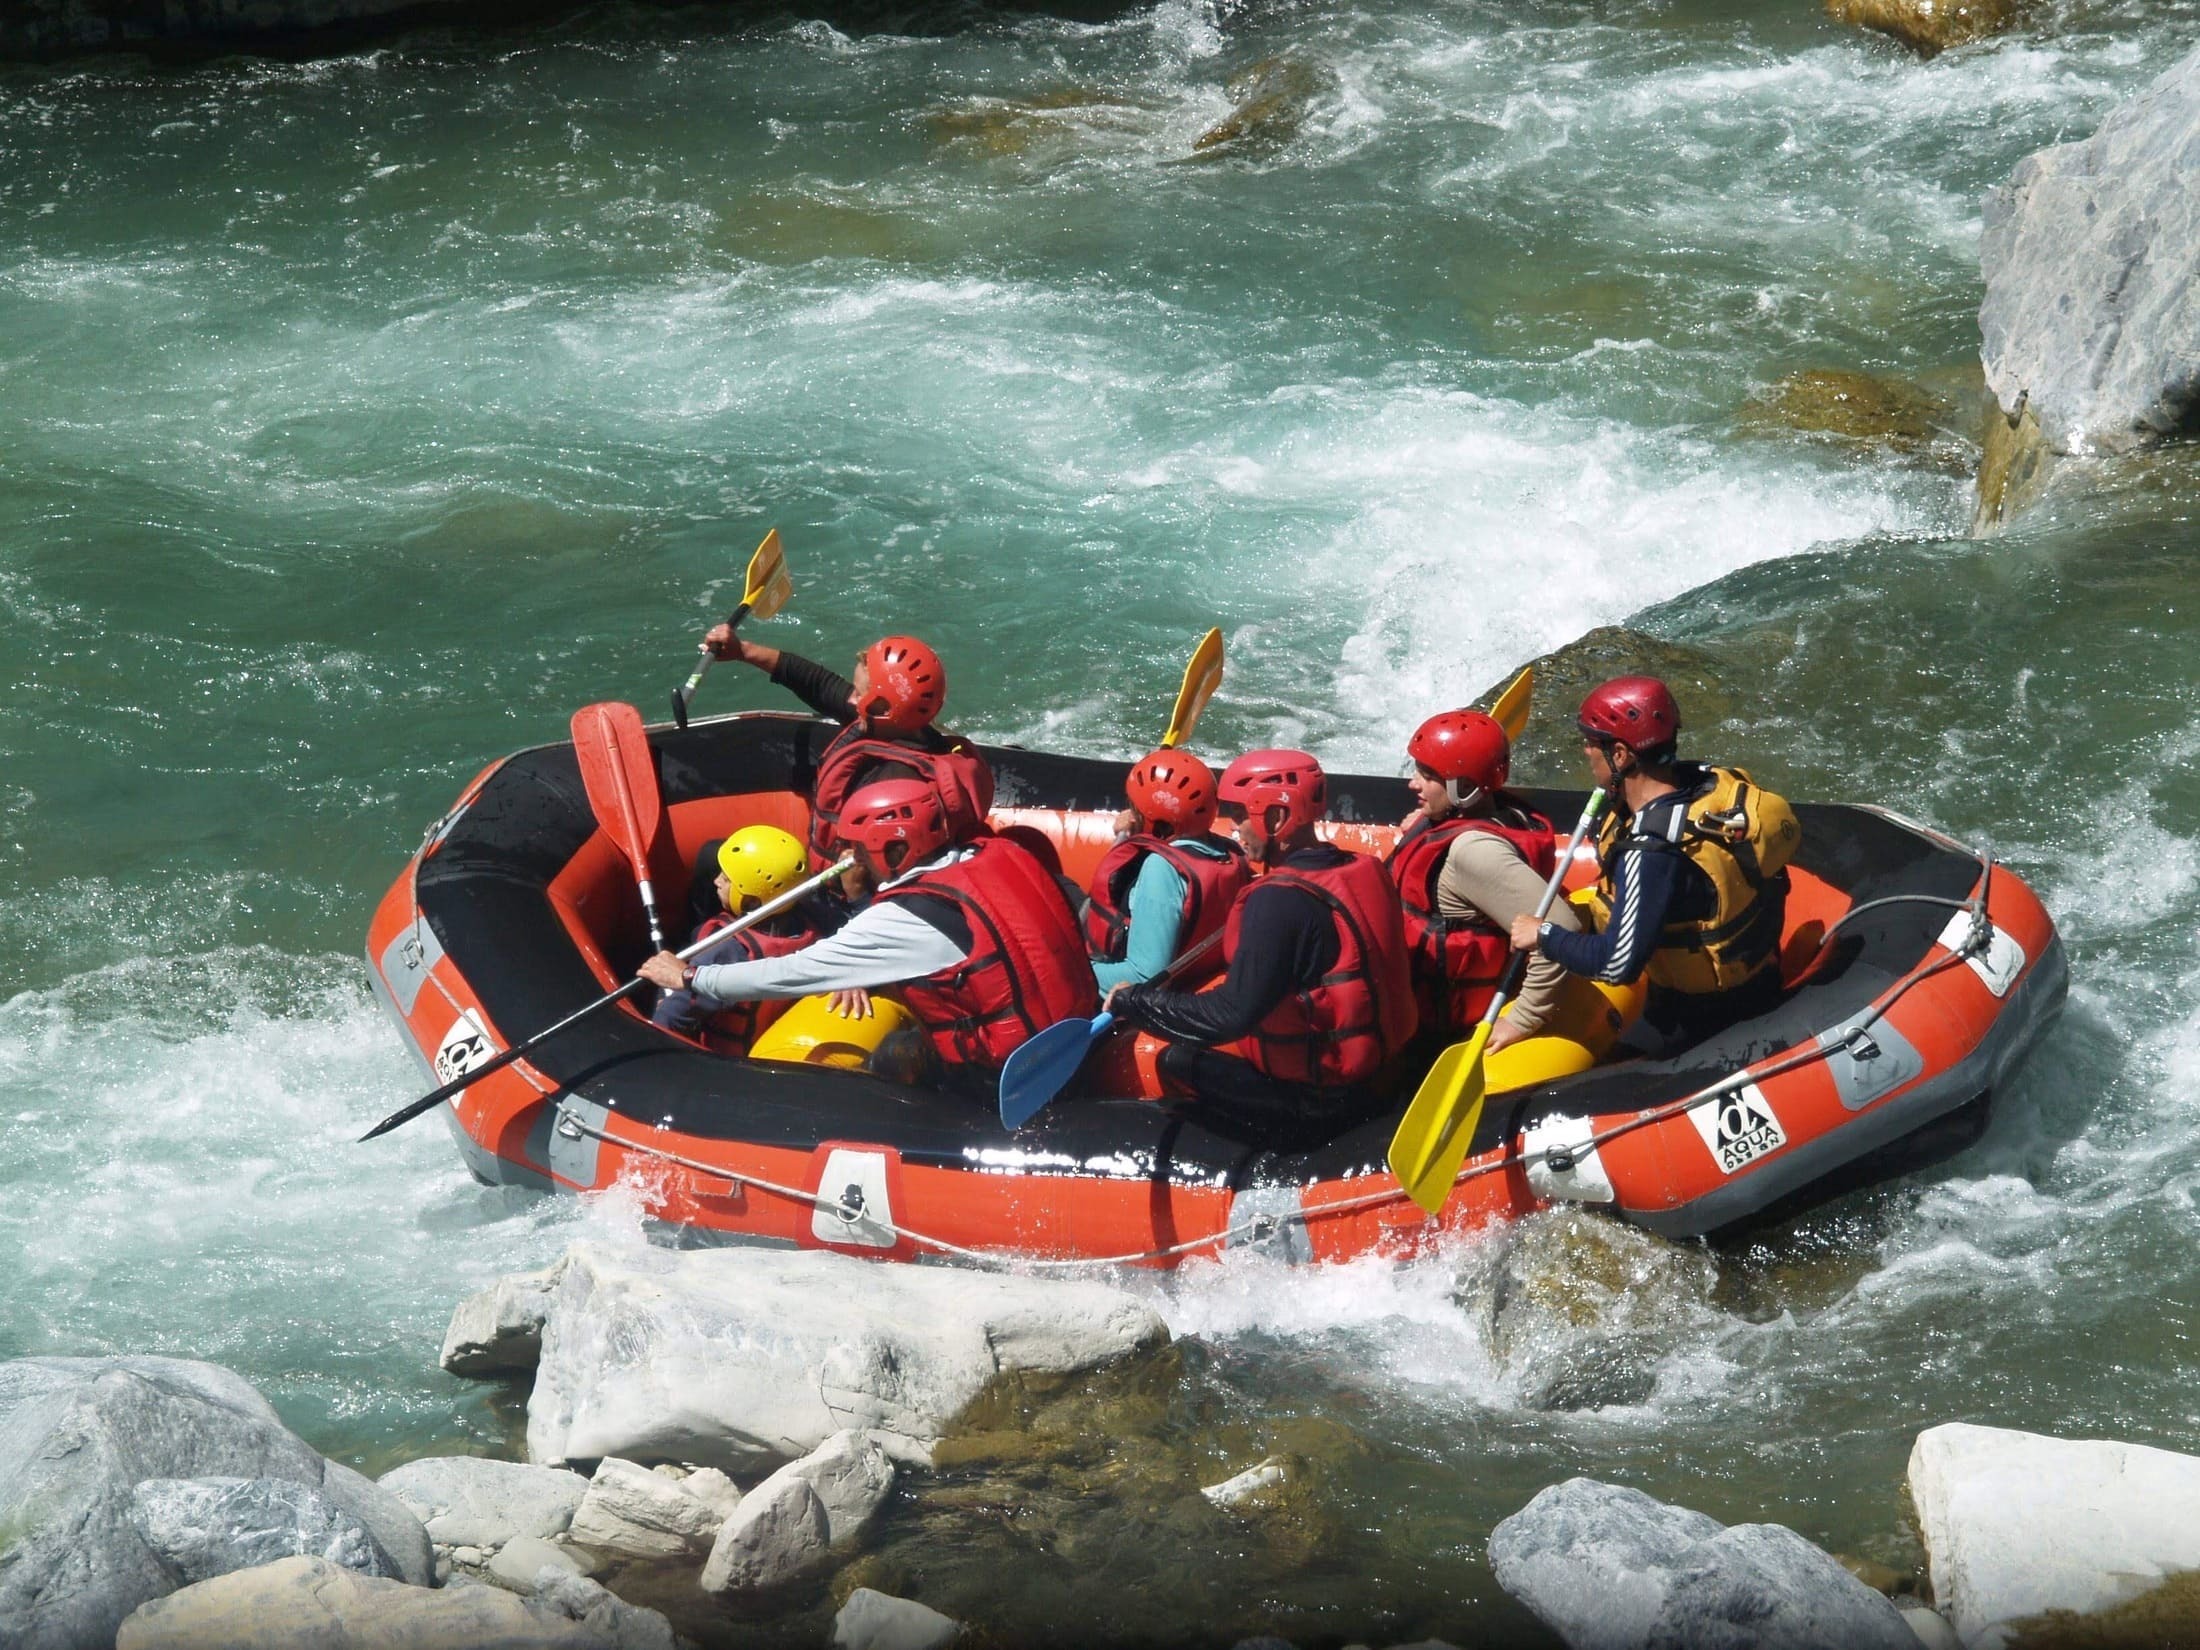 A photo of a group of tourists rafting